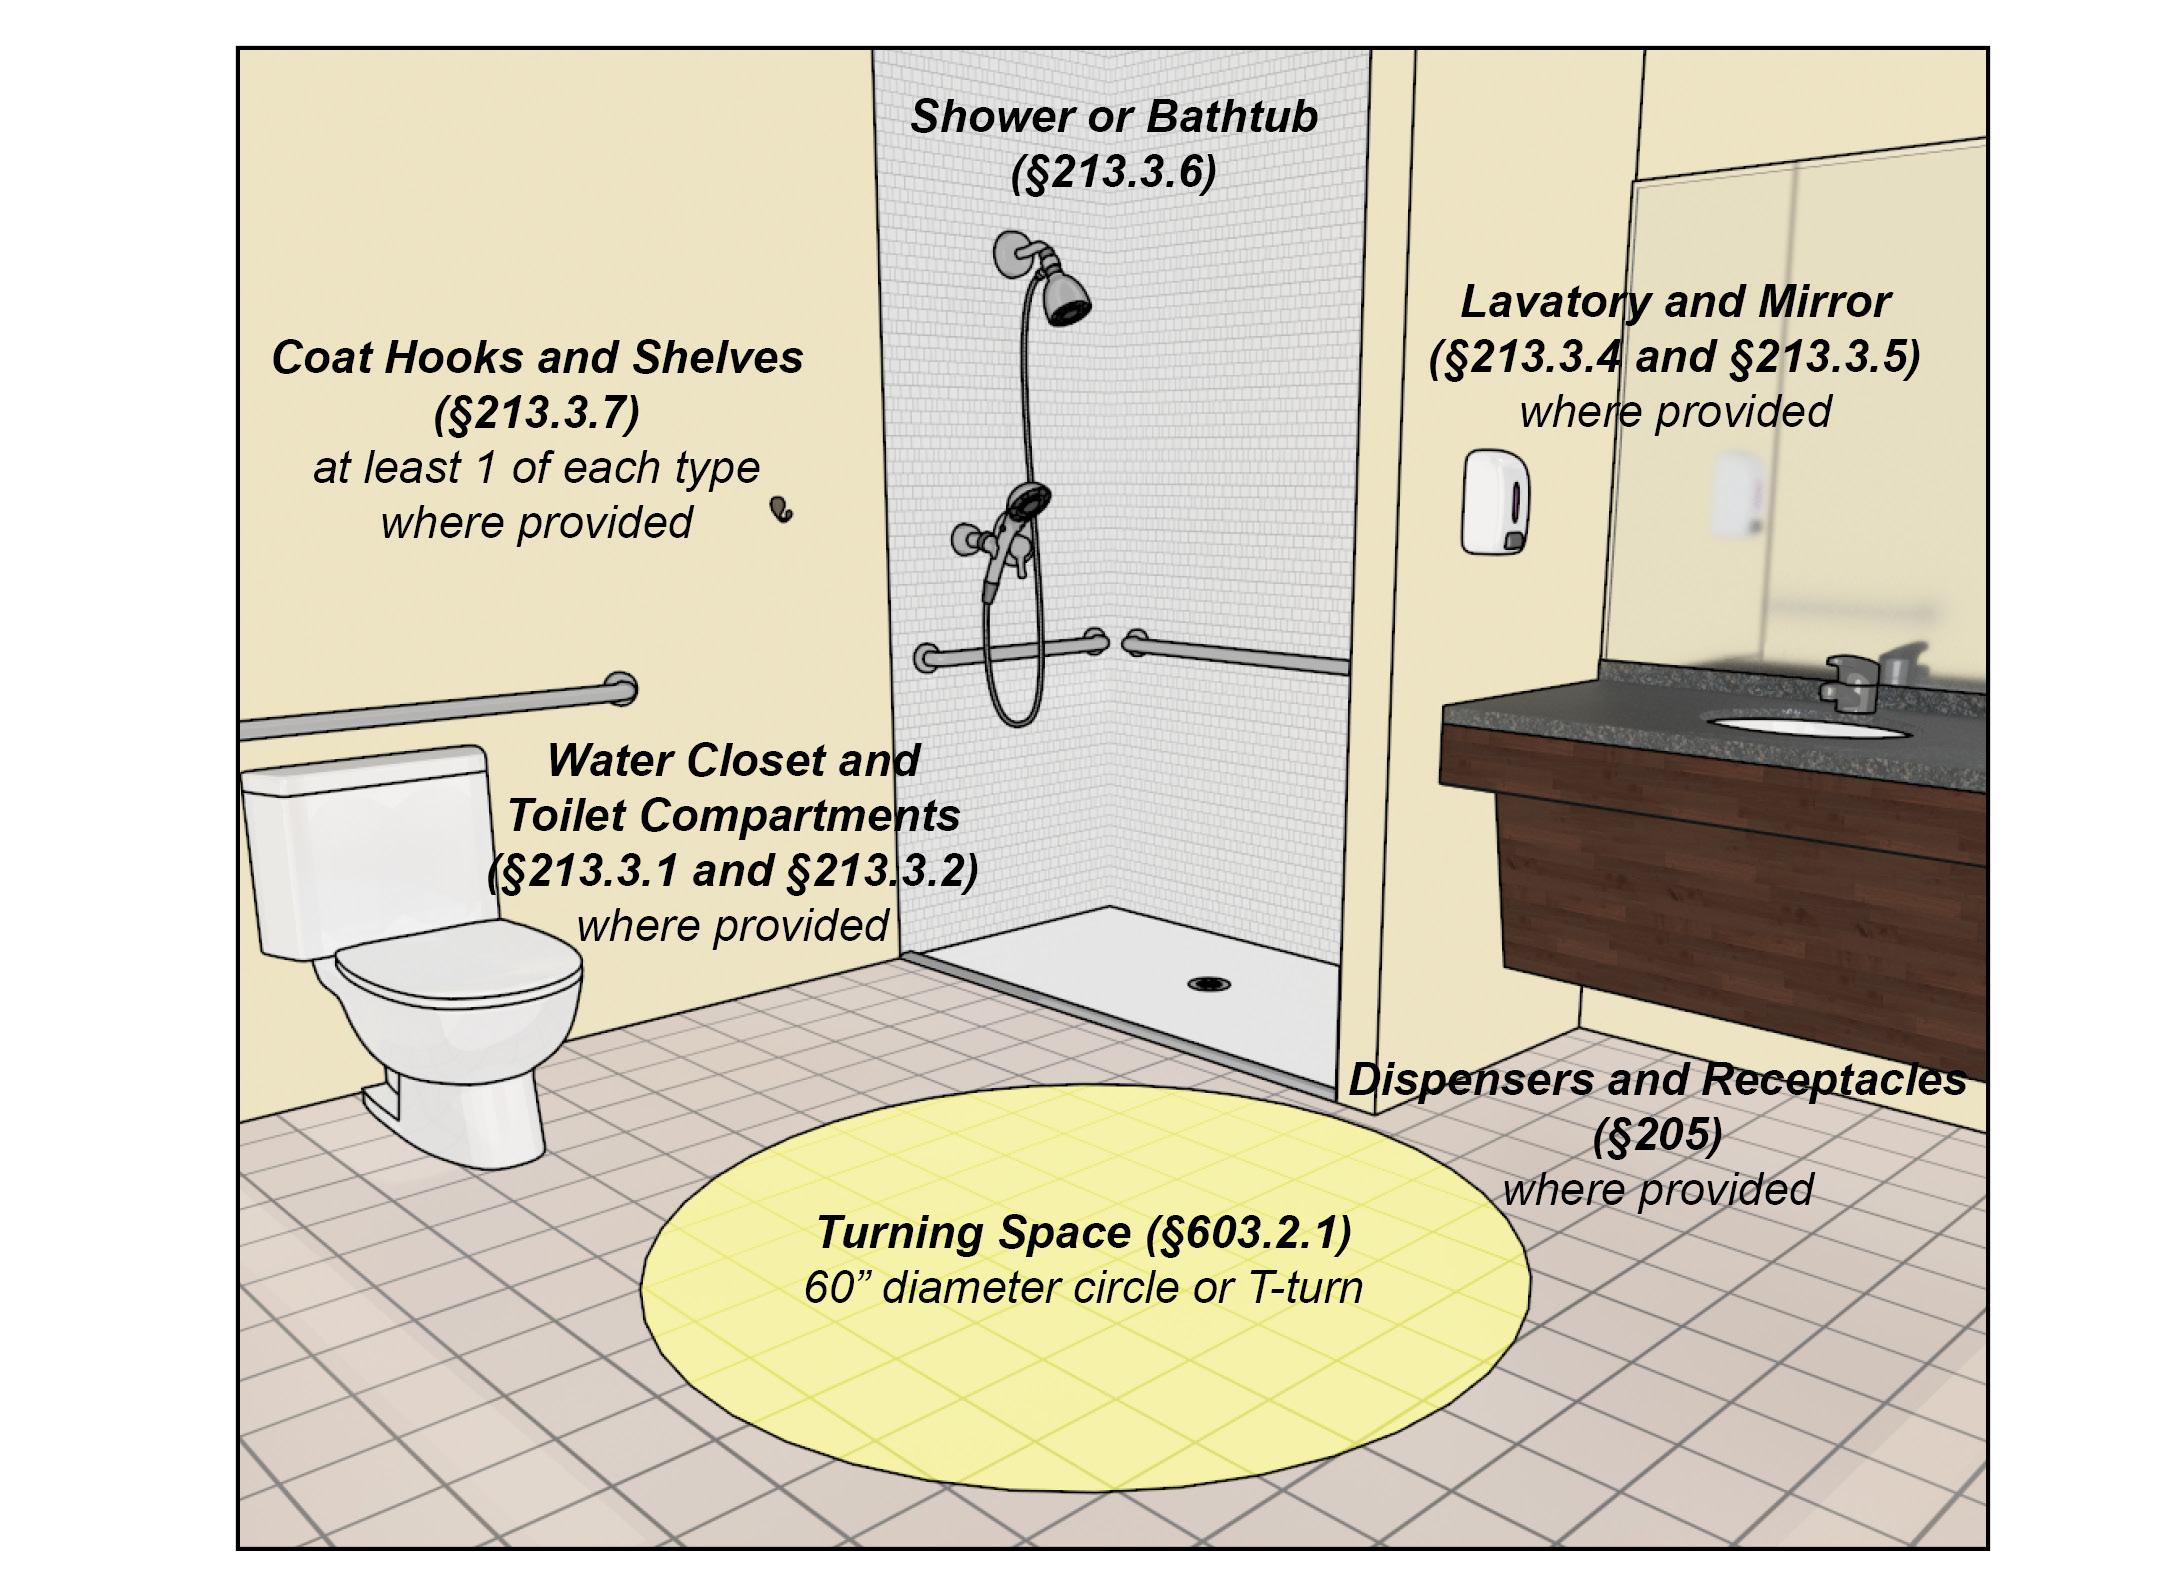 Components of a single-user bathing room: Shower or Bathtub
(§213.3.6), Lavatory and Mirror (§213.3.4 and §213.3.5) where provided,
Water Closet and Toilet Compartments (§213.3.1 and §213.3.2) where
provided, Dispensers and Receptacles (§205) where provided, Coat Hooks
and Shelves (§213.3.7) at least 1 of each type where provided, Turning
Space (§603.2.1) 60